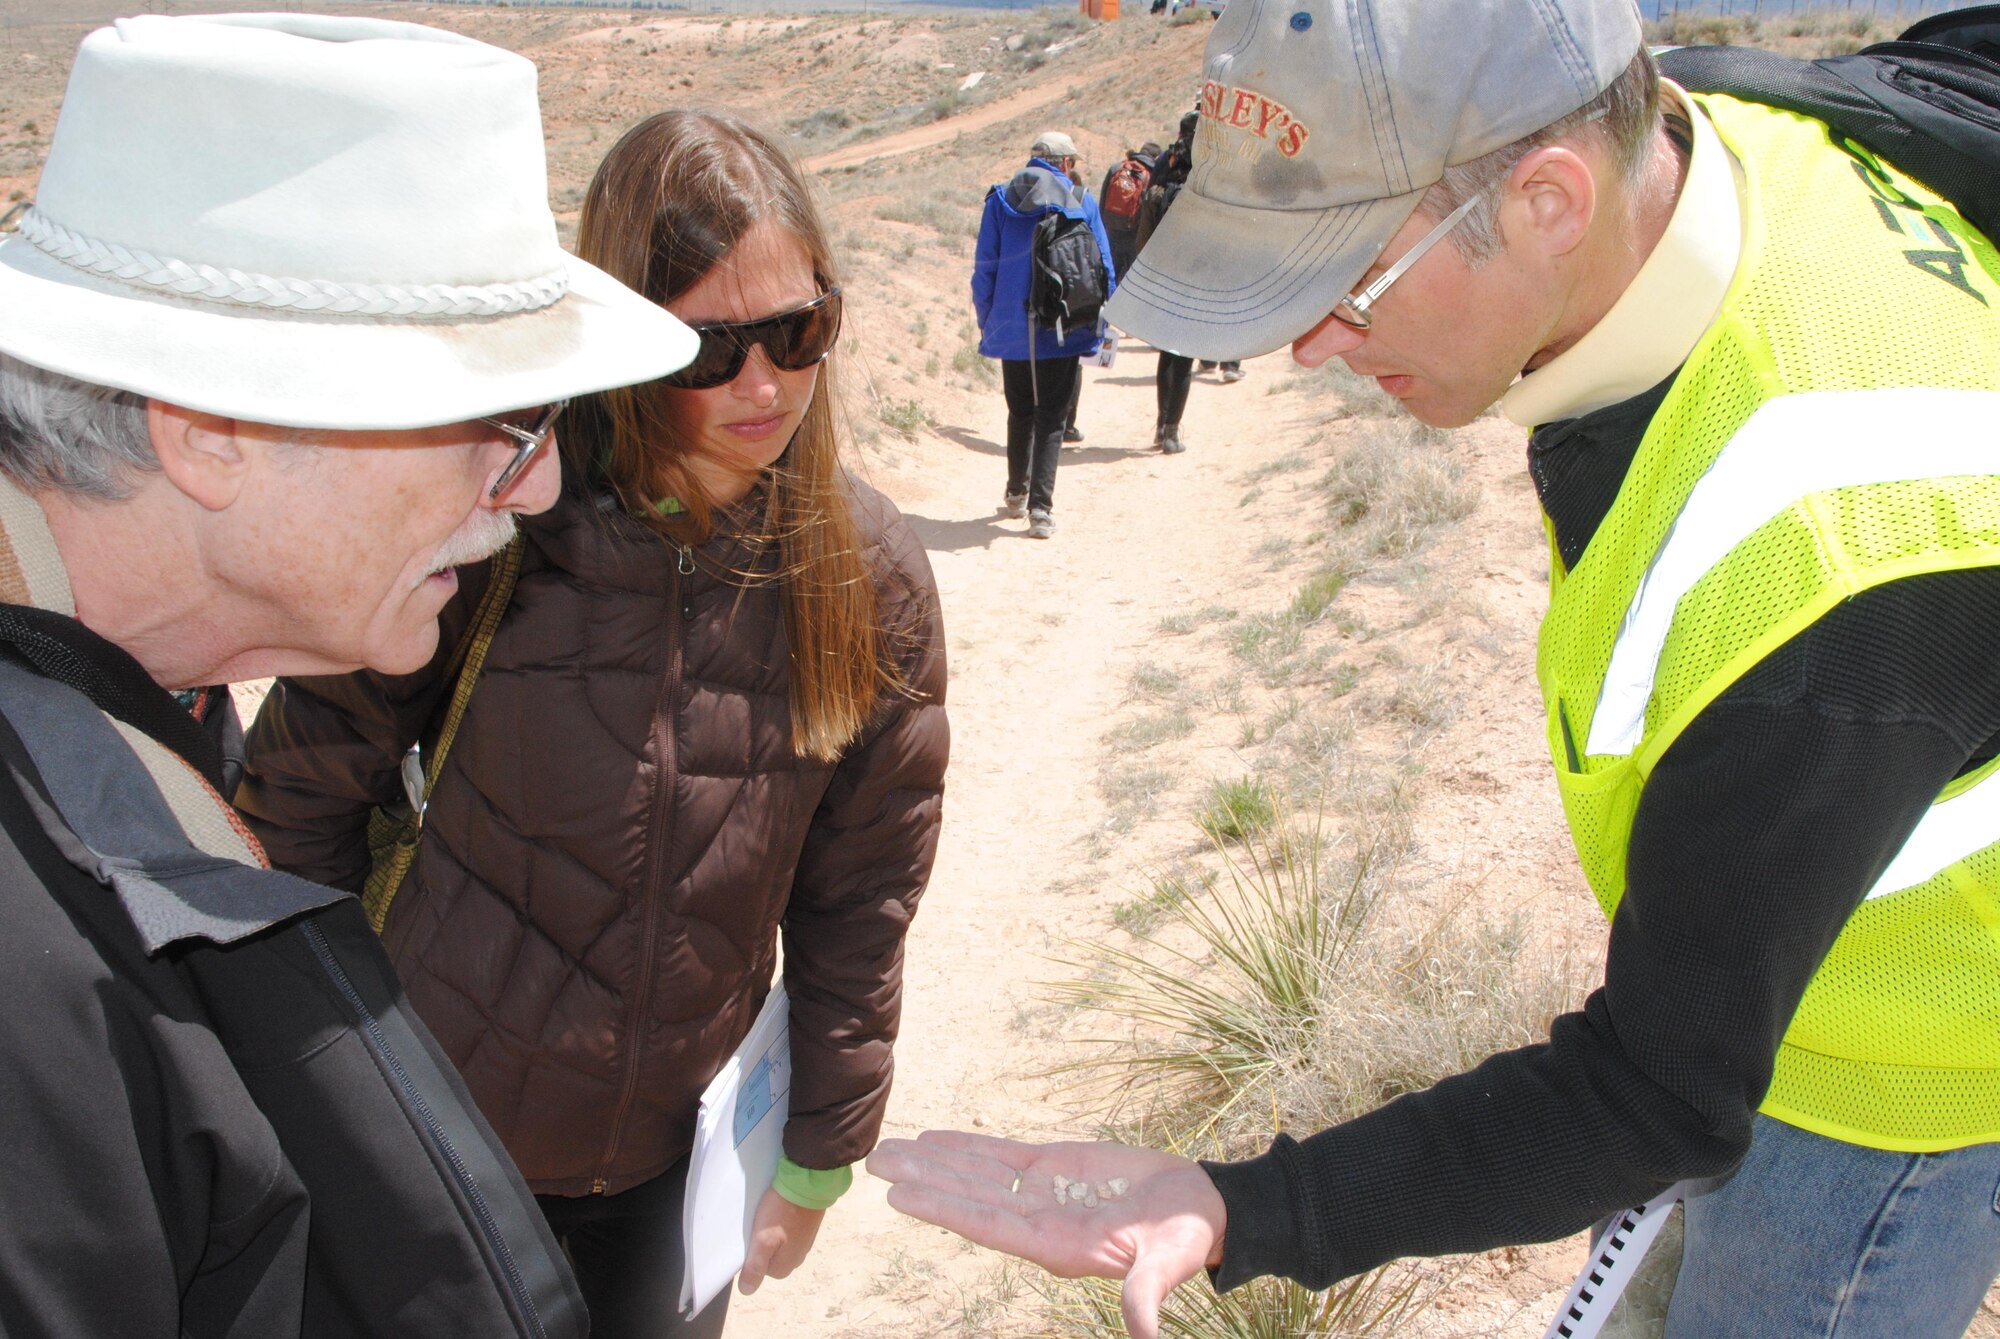 At right,Collin Plank, an earth scientist with the engineering consultant contractor AECOM, shares rock samples with members of the community participating in a Bulk Fuels Facility field trip April 18 near Tijeras Arroyo, south of the Albuquerque International Sunport. Plank is a member of a team of specialists helping participants understand hydrology as it relates to the BFF contamination plume. (U.S. Air Force photo/Jim Fisher/Released)